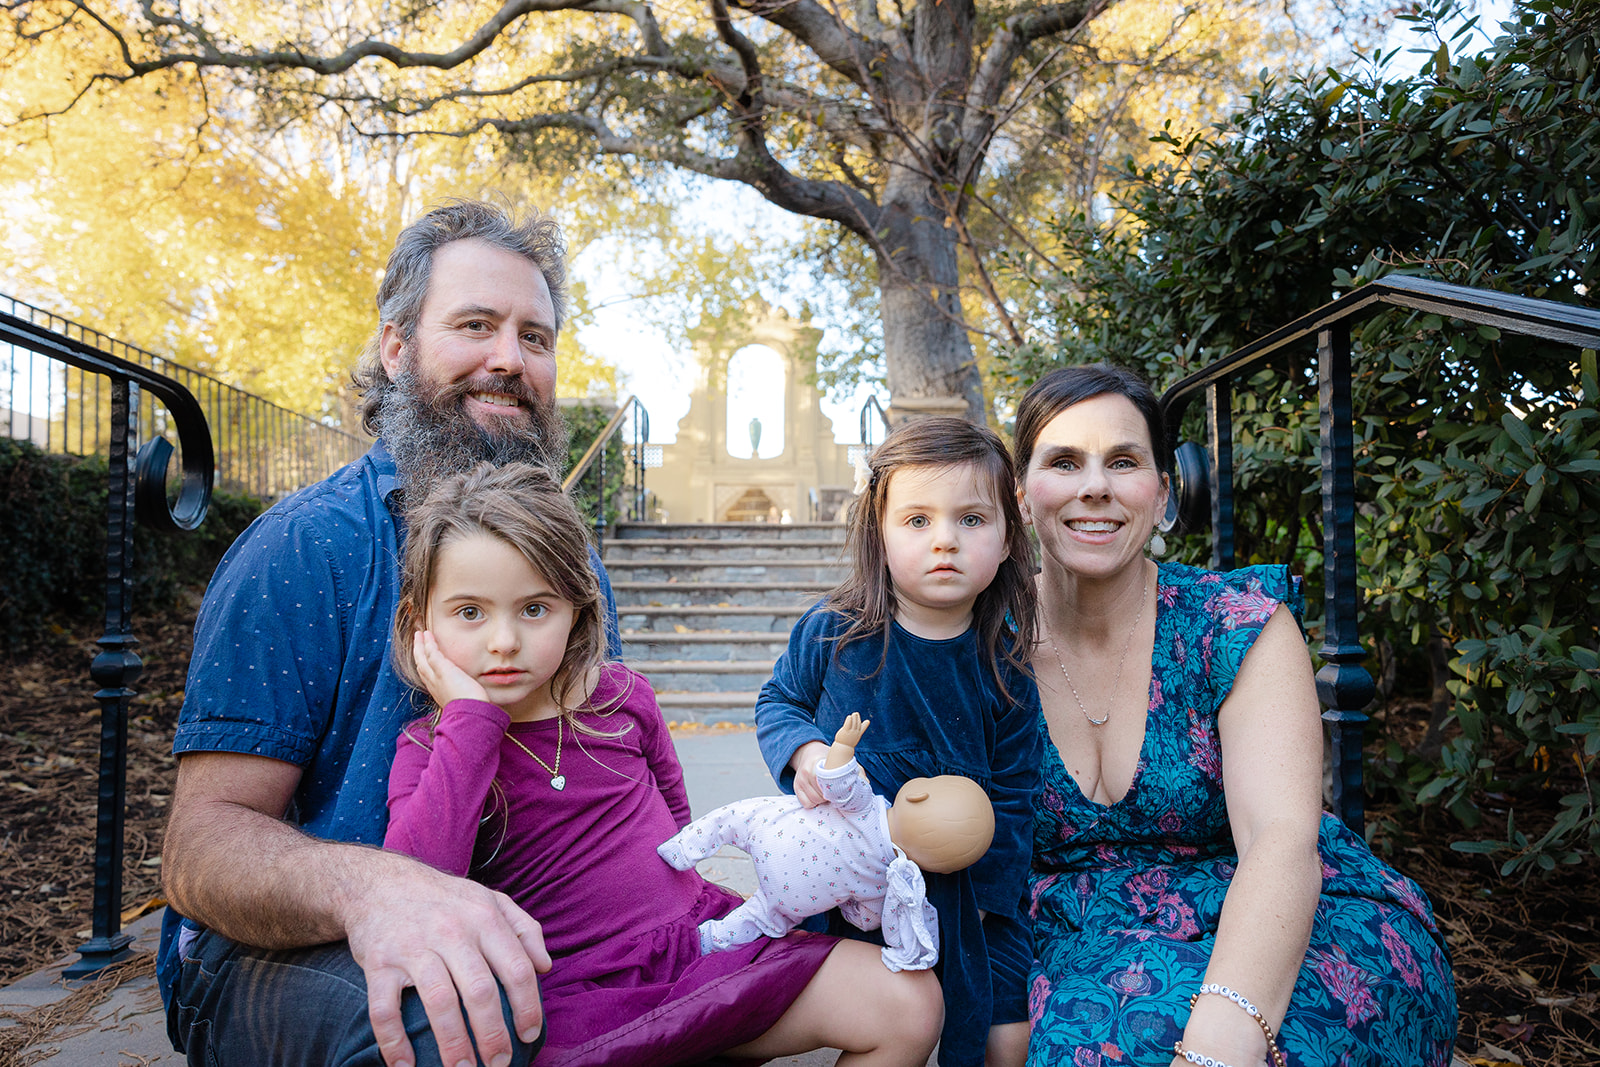 Fall family photos at Piedmont Park in the East Bay of California 